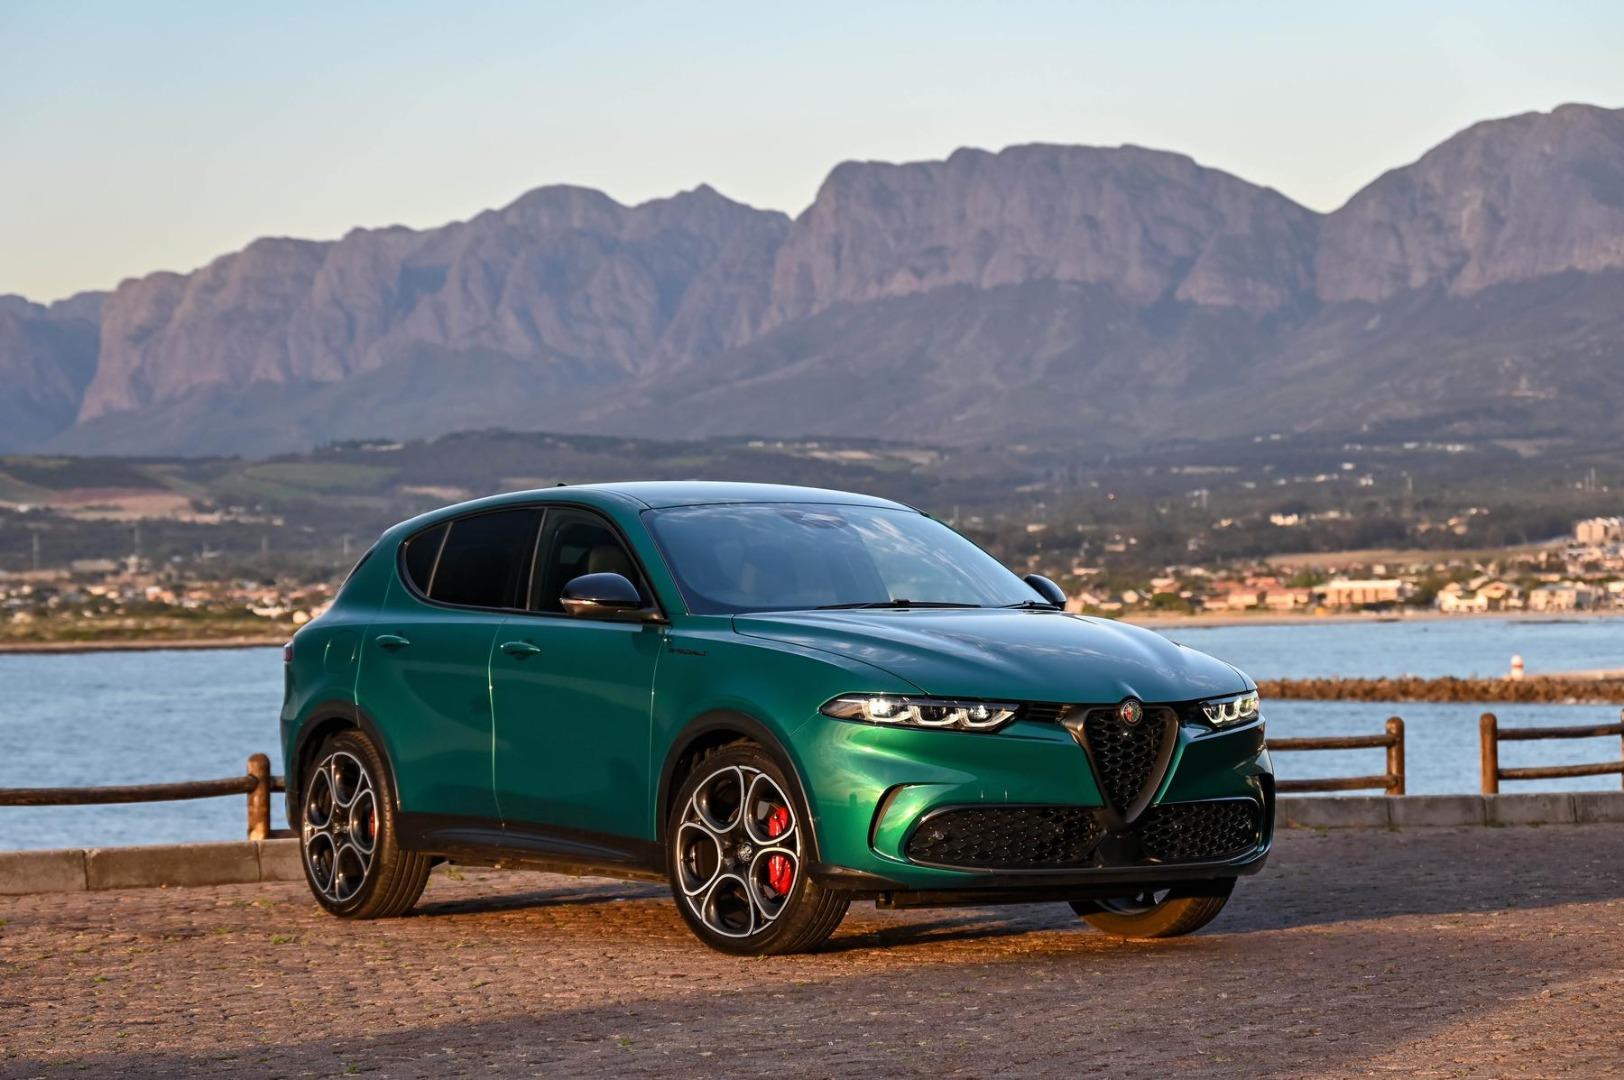 4 alfa romeo tonale accessories you didn't know you needed